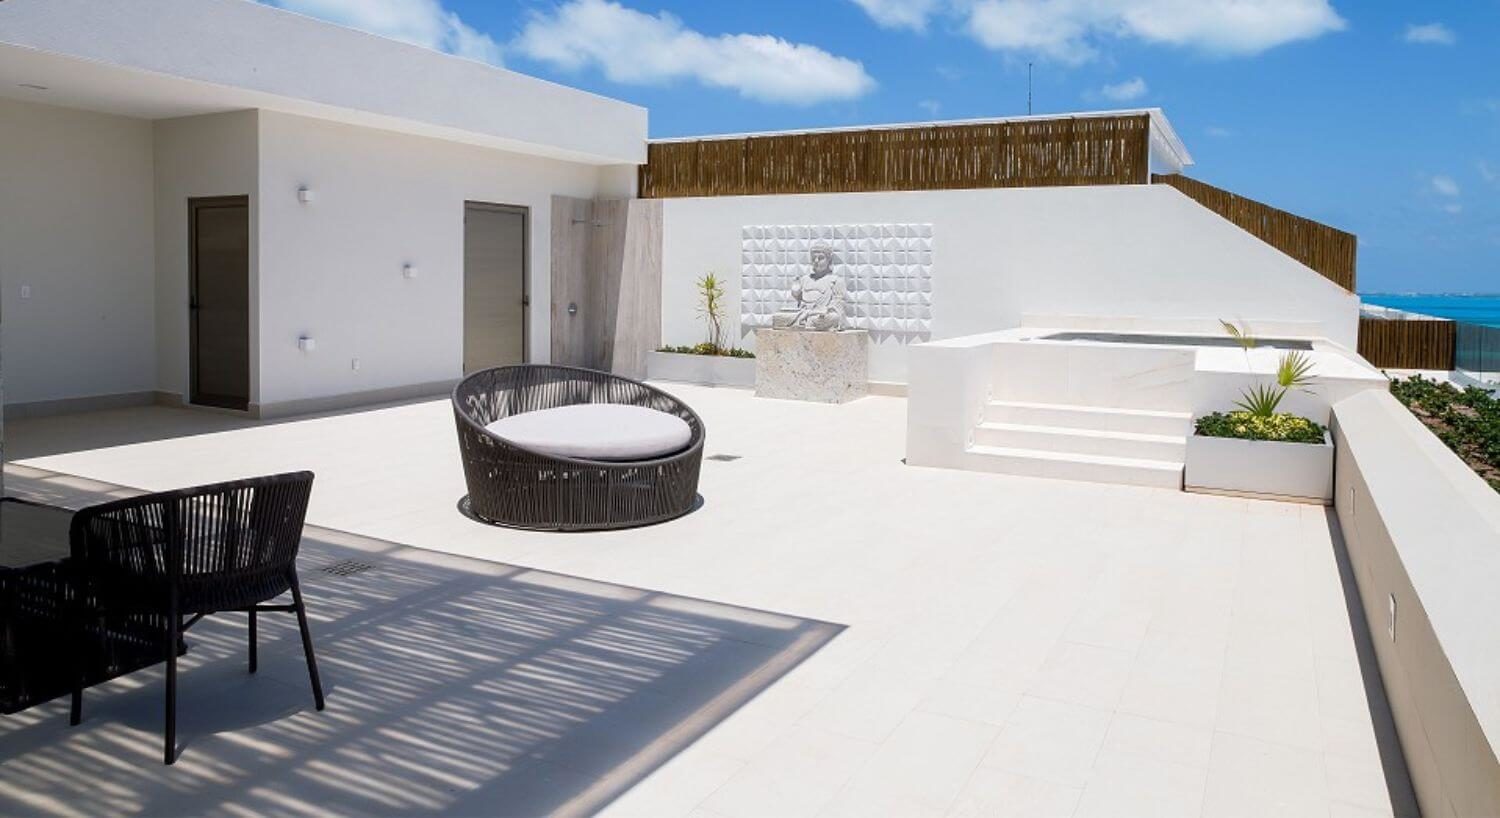 A rooftop terrace with outdoor patio furniture, a hot tub, a Buddha statue, and ocean views.